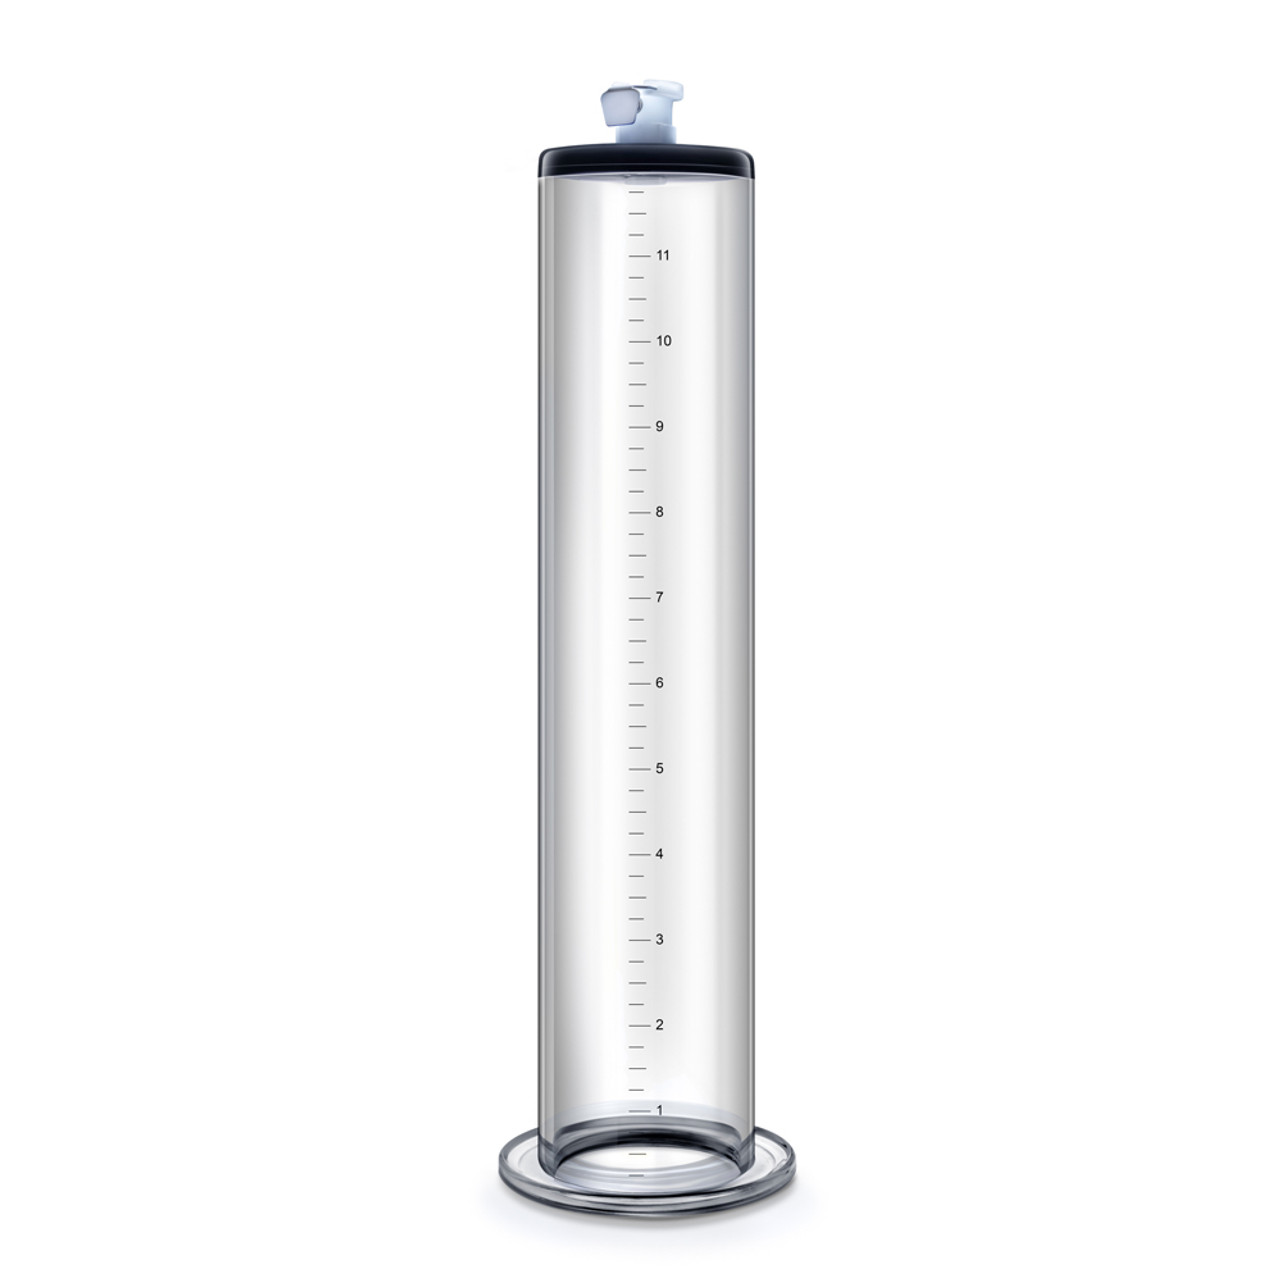 Buy the Performance 12 inch by 2 inch Vacuum Penis Pump Cylinder